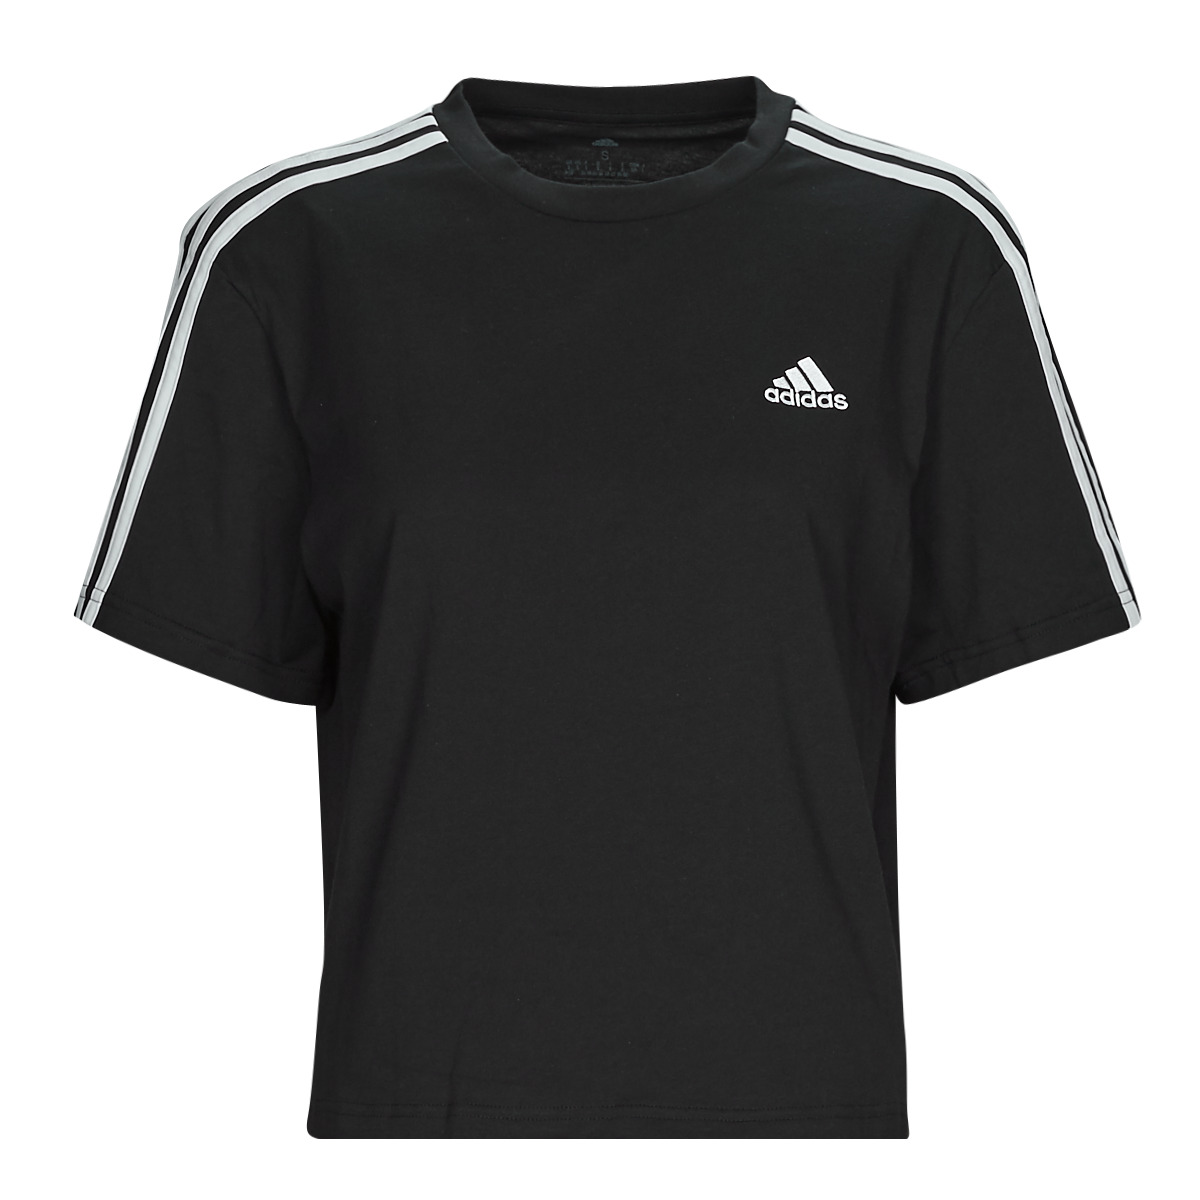 Adidas Sportswear 3S CR TOP Black - Fast delivery | Spartoo Europe ! -  Clothing short-sleeved t-shirts Women 24,80 €